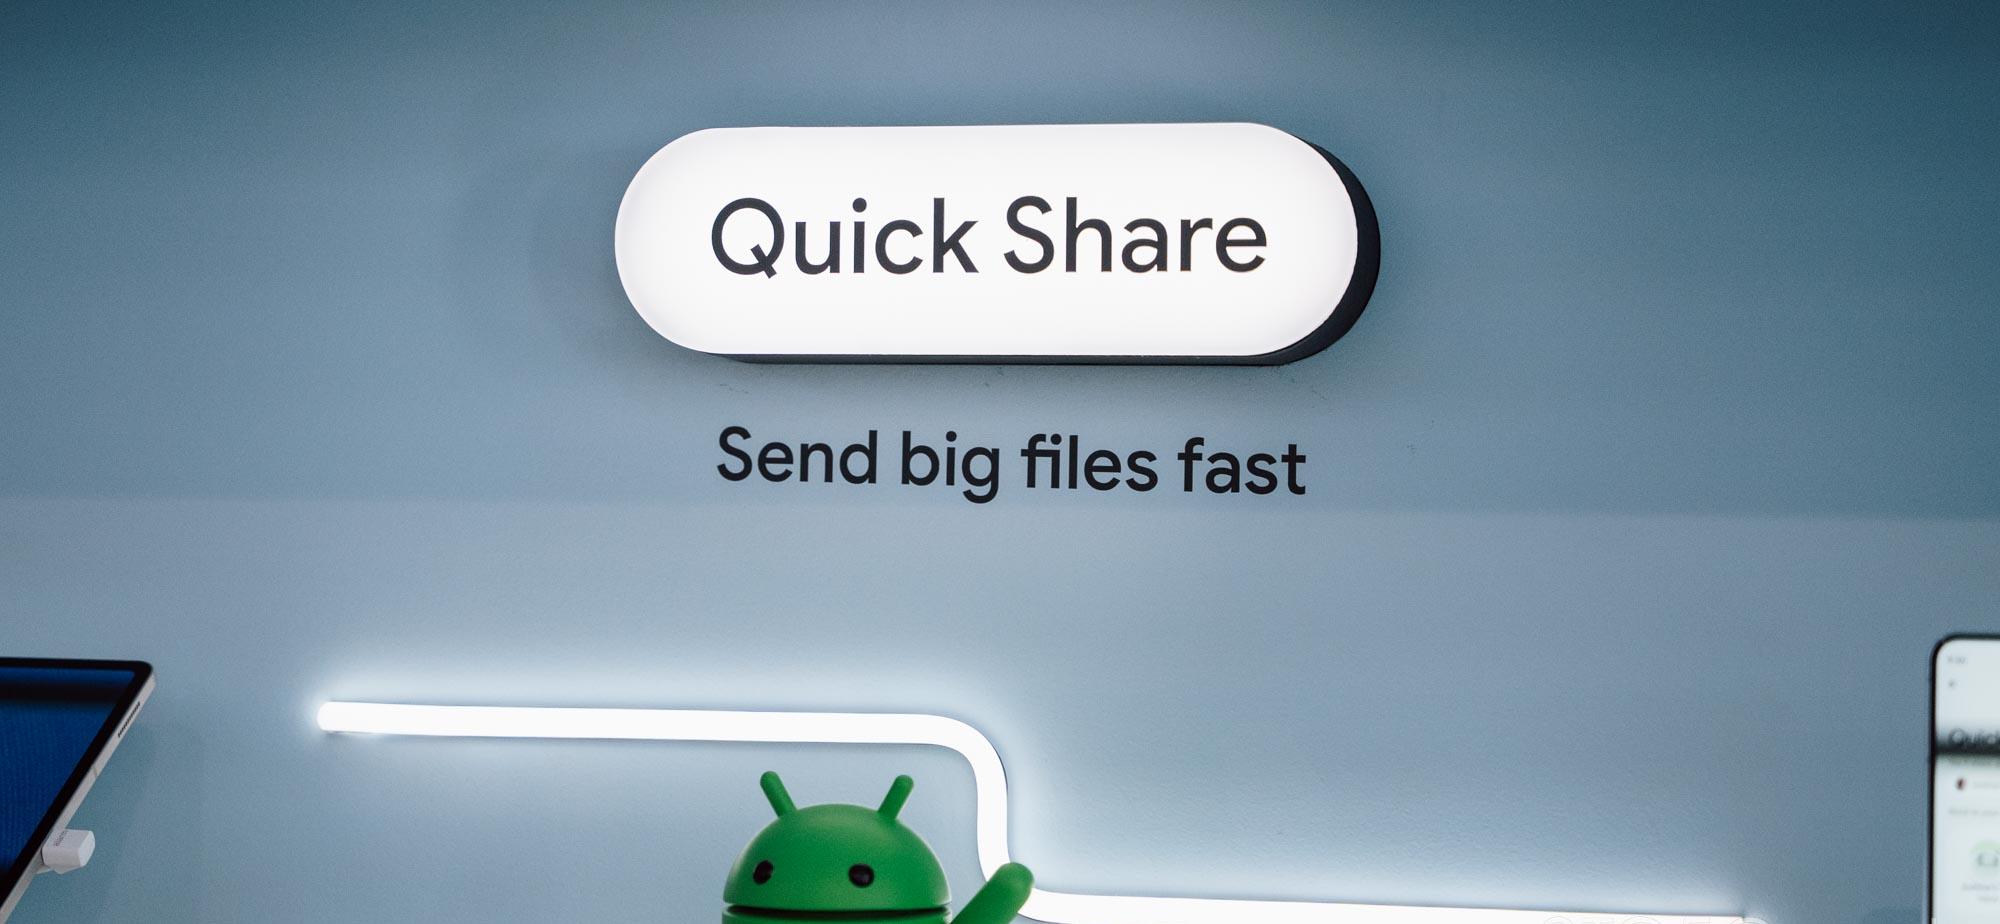 How to Use Pixel Tips to Enable Quick Share on Your Google Device